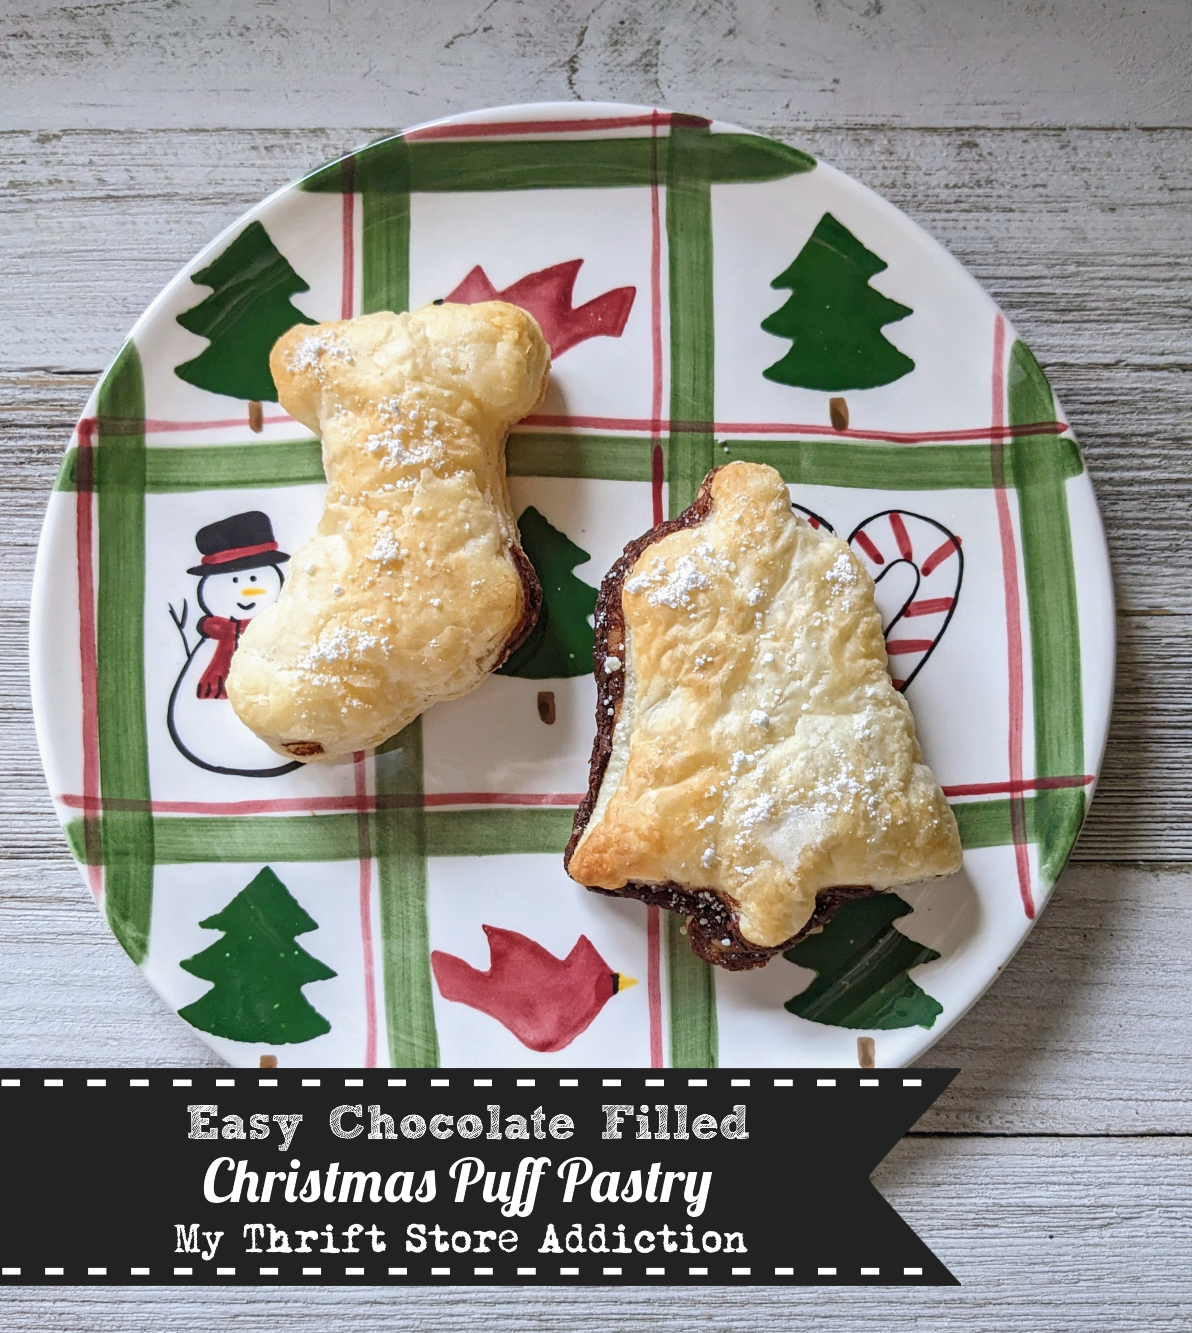 Chocolate filled Christmas puff pastry